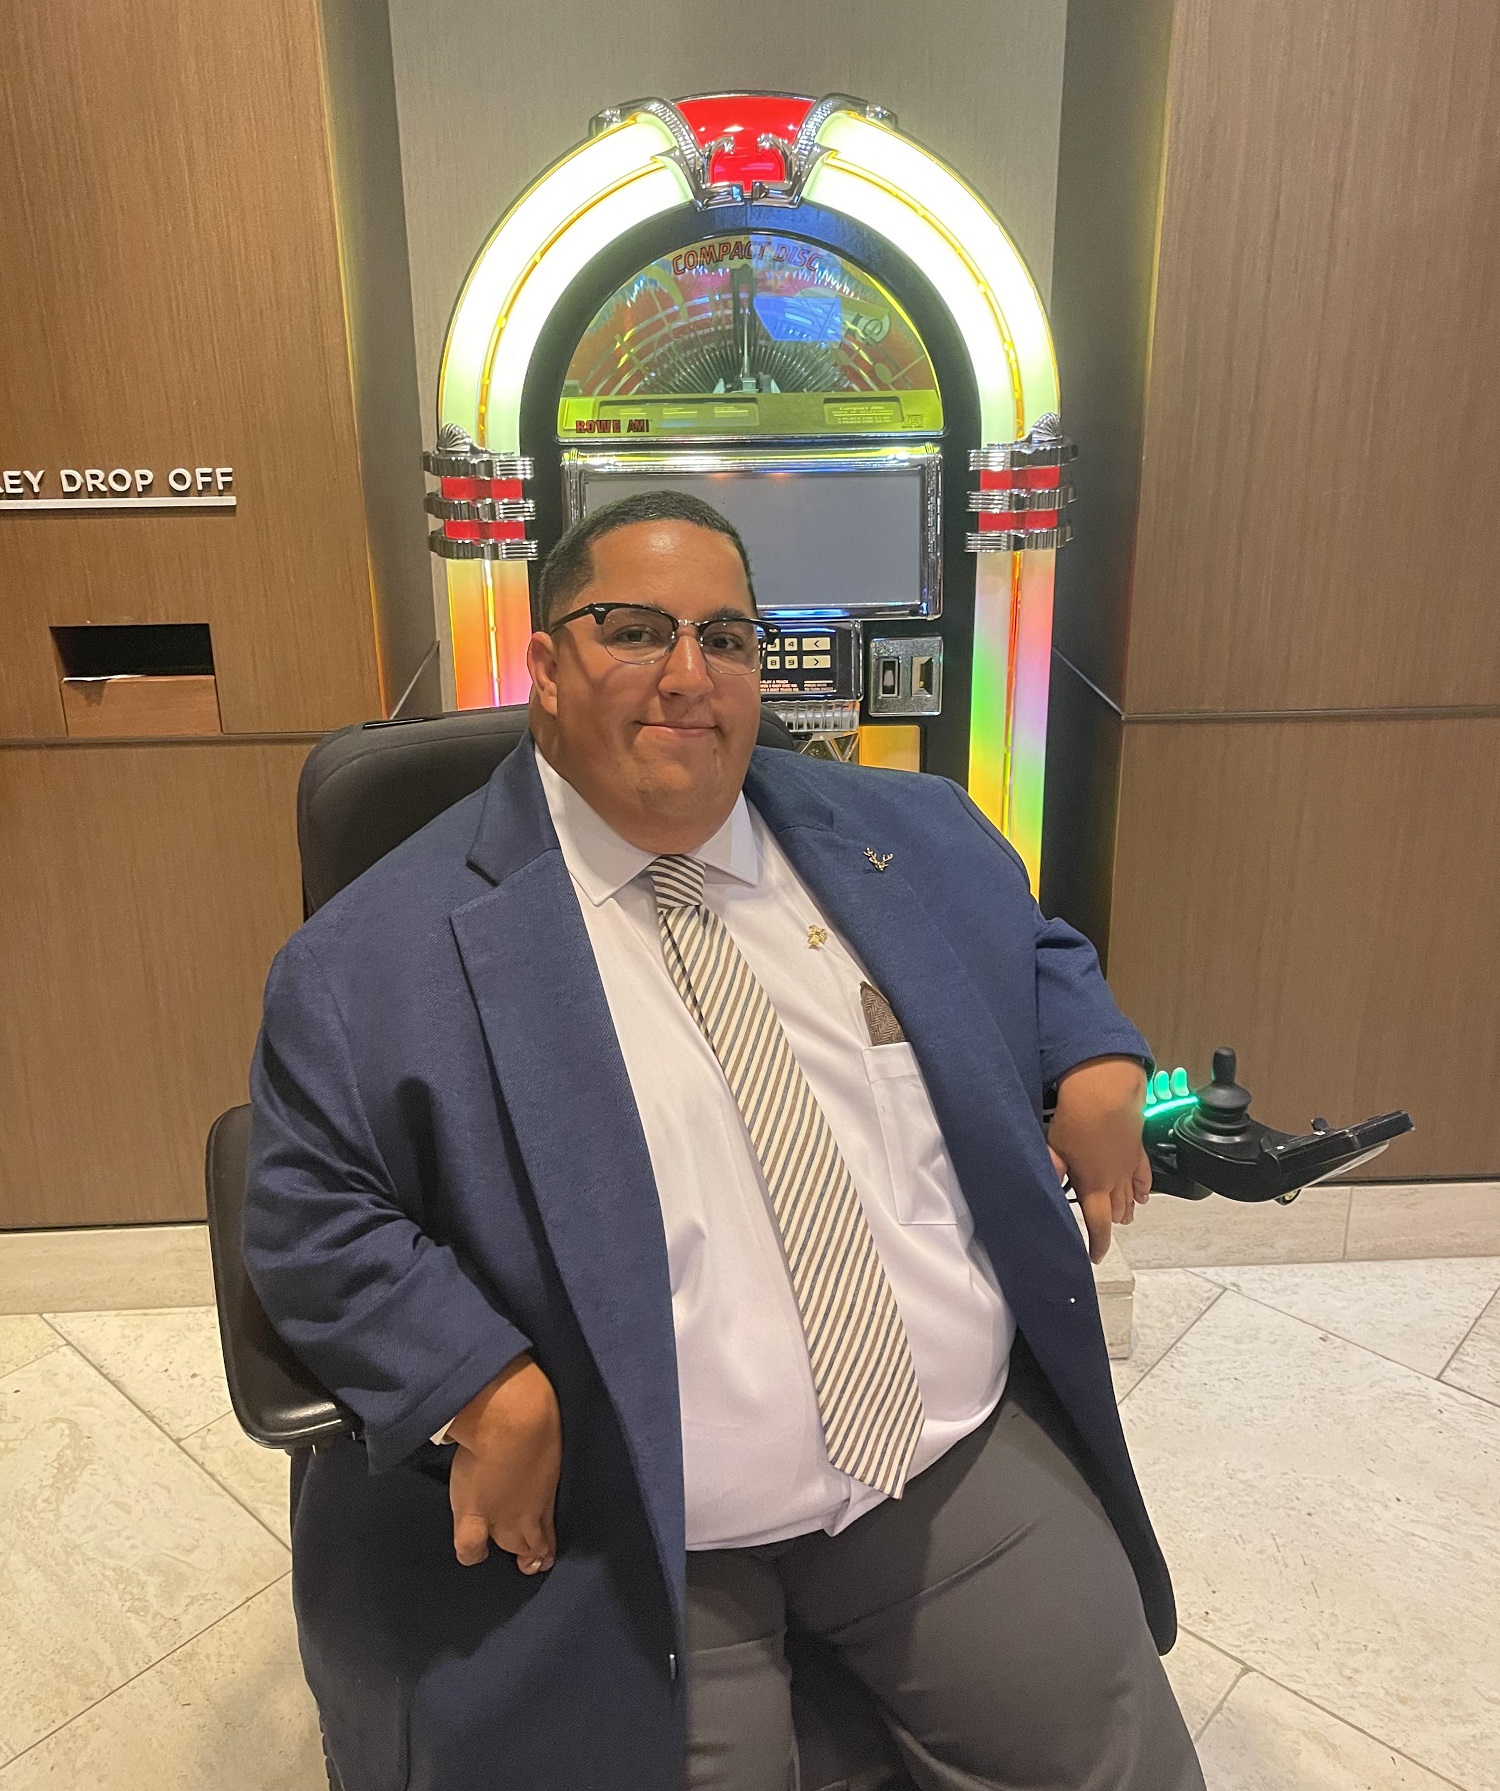 Greyson Jennings sits in his wheelchair in front of a colorful jukebox as he smiles for the camera. He is wearing a suit and tie. 